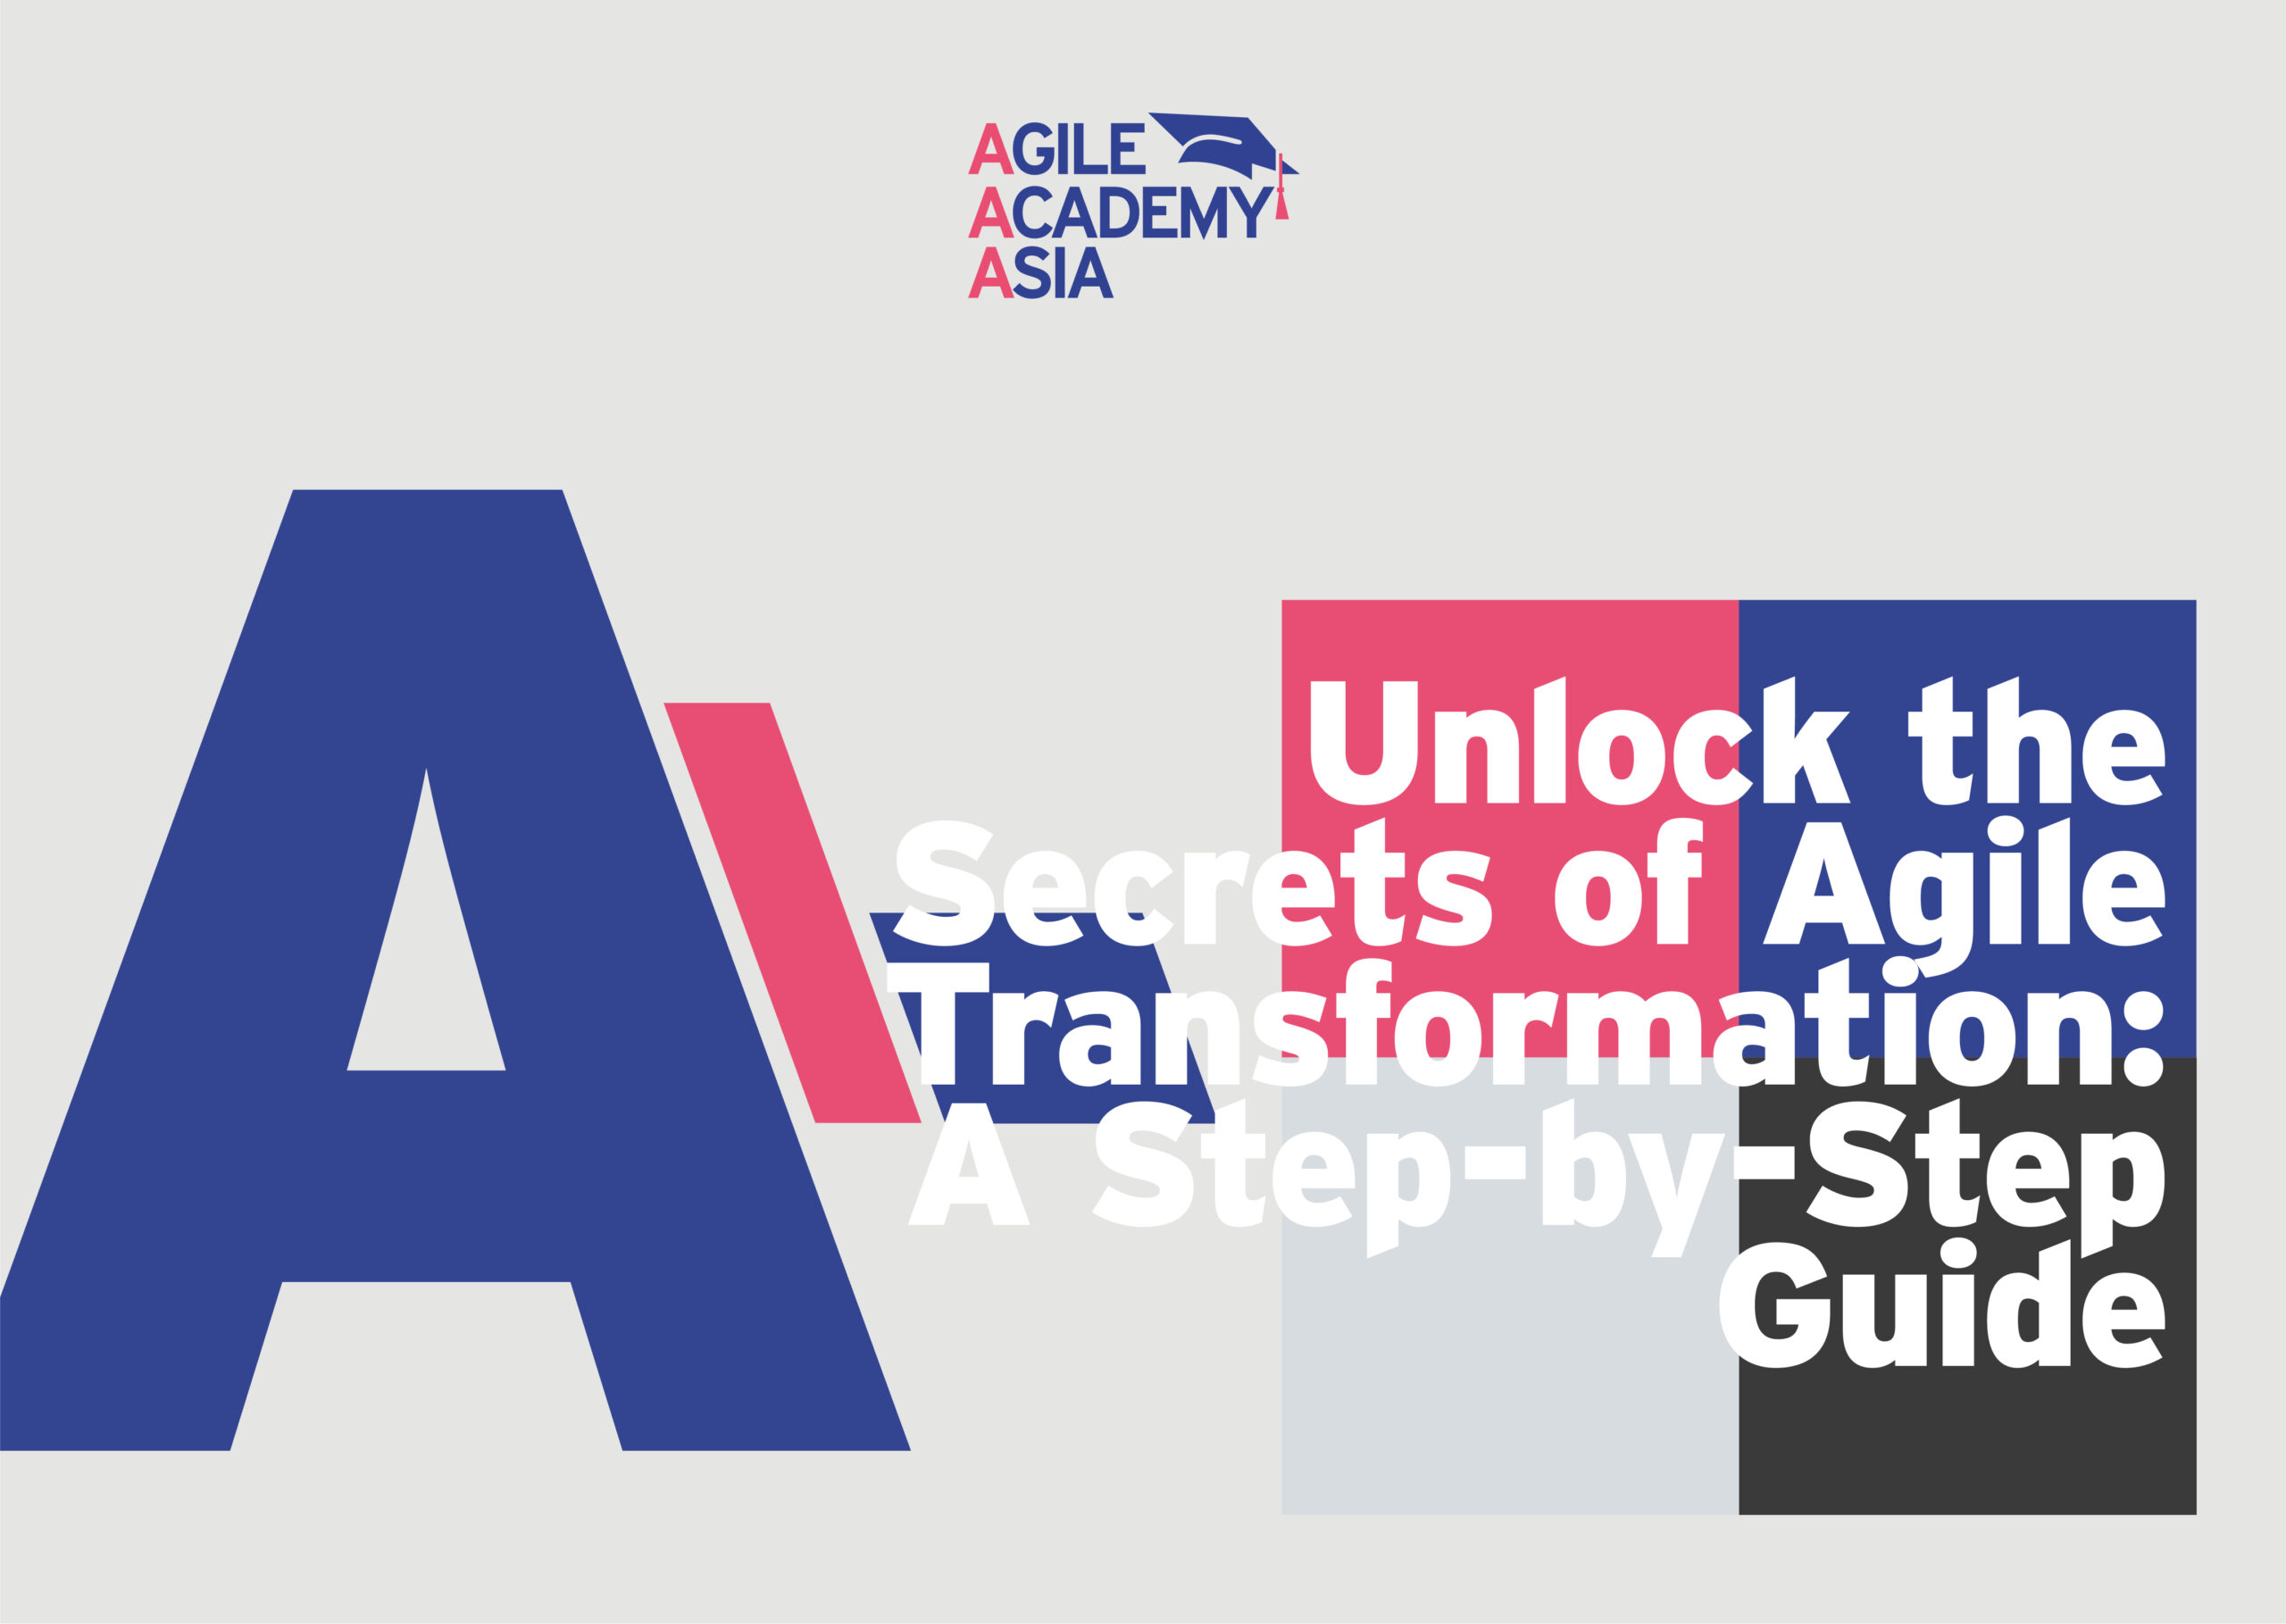 Unlock the Secrets of Agile Transformation: A Step-by-Step Guide